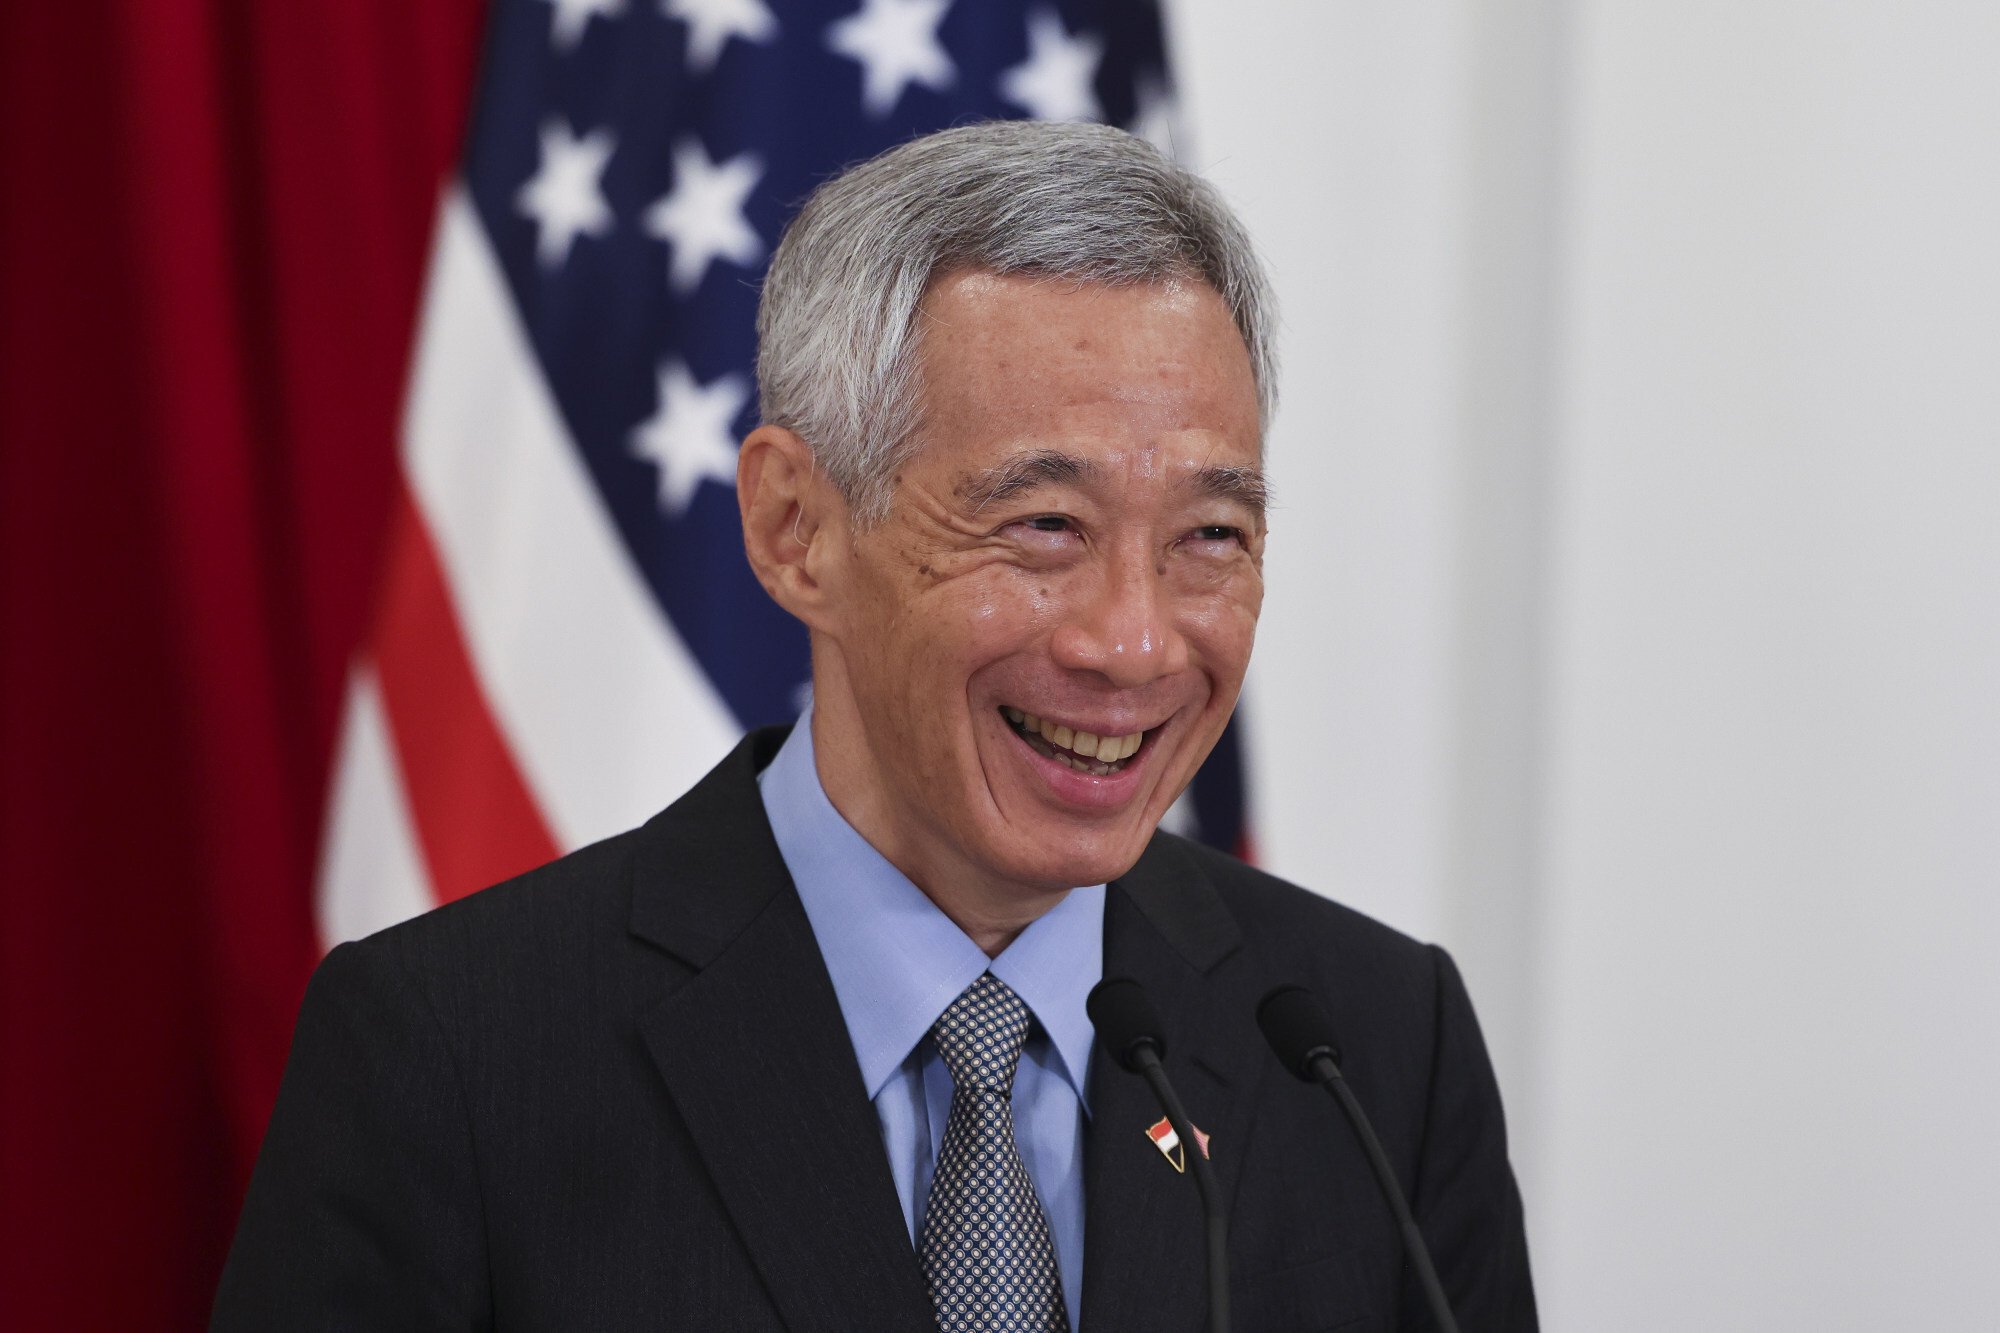 Singapore’s prime minister Lee Hsien Loong is the world’s highest-paid leader, but claims it’s US presidents that get all the perks. Photo: AP